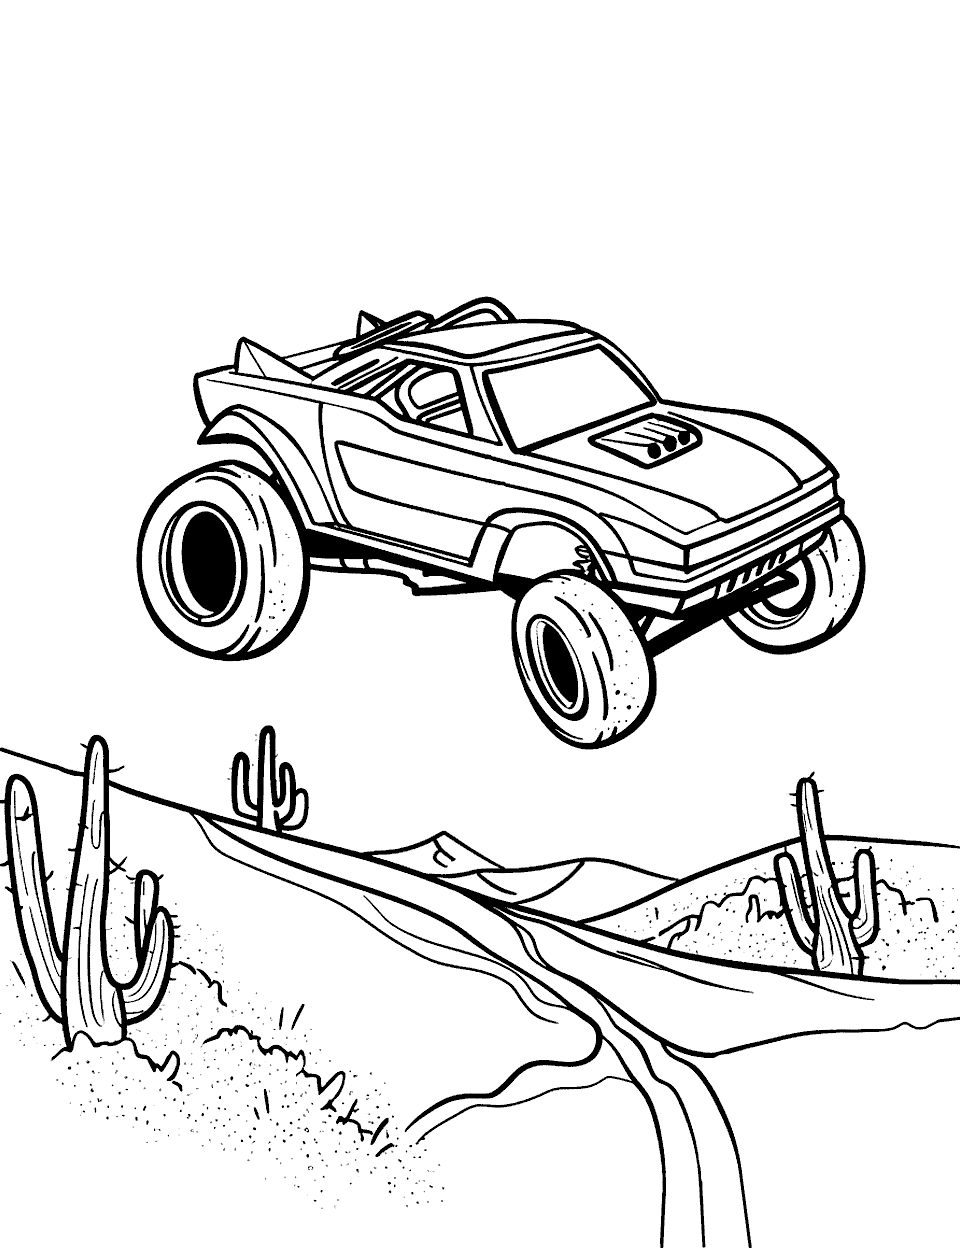 Desert Dune Buggy Dash Coloring Page - A Hot Wheels dune buggy leaping over a sand dune, cactus plants in the background.